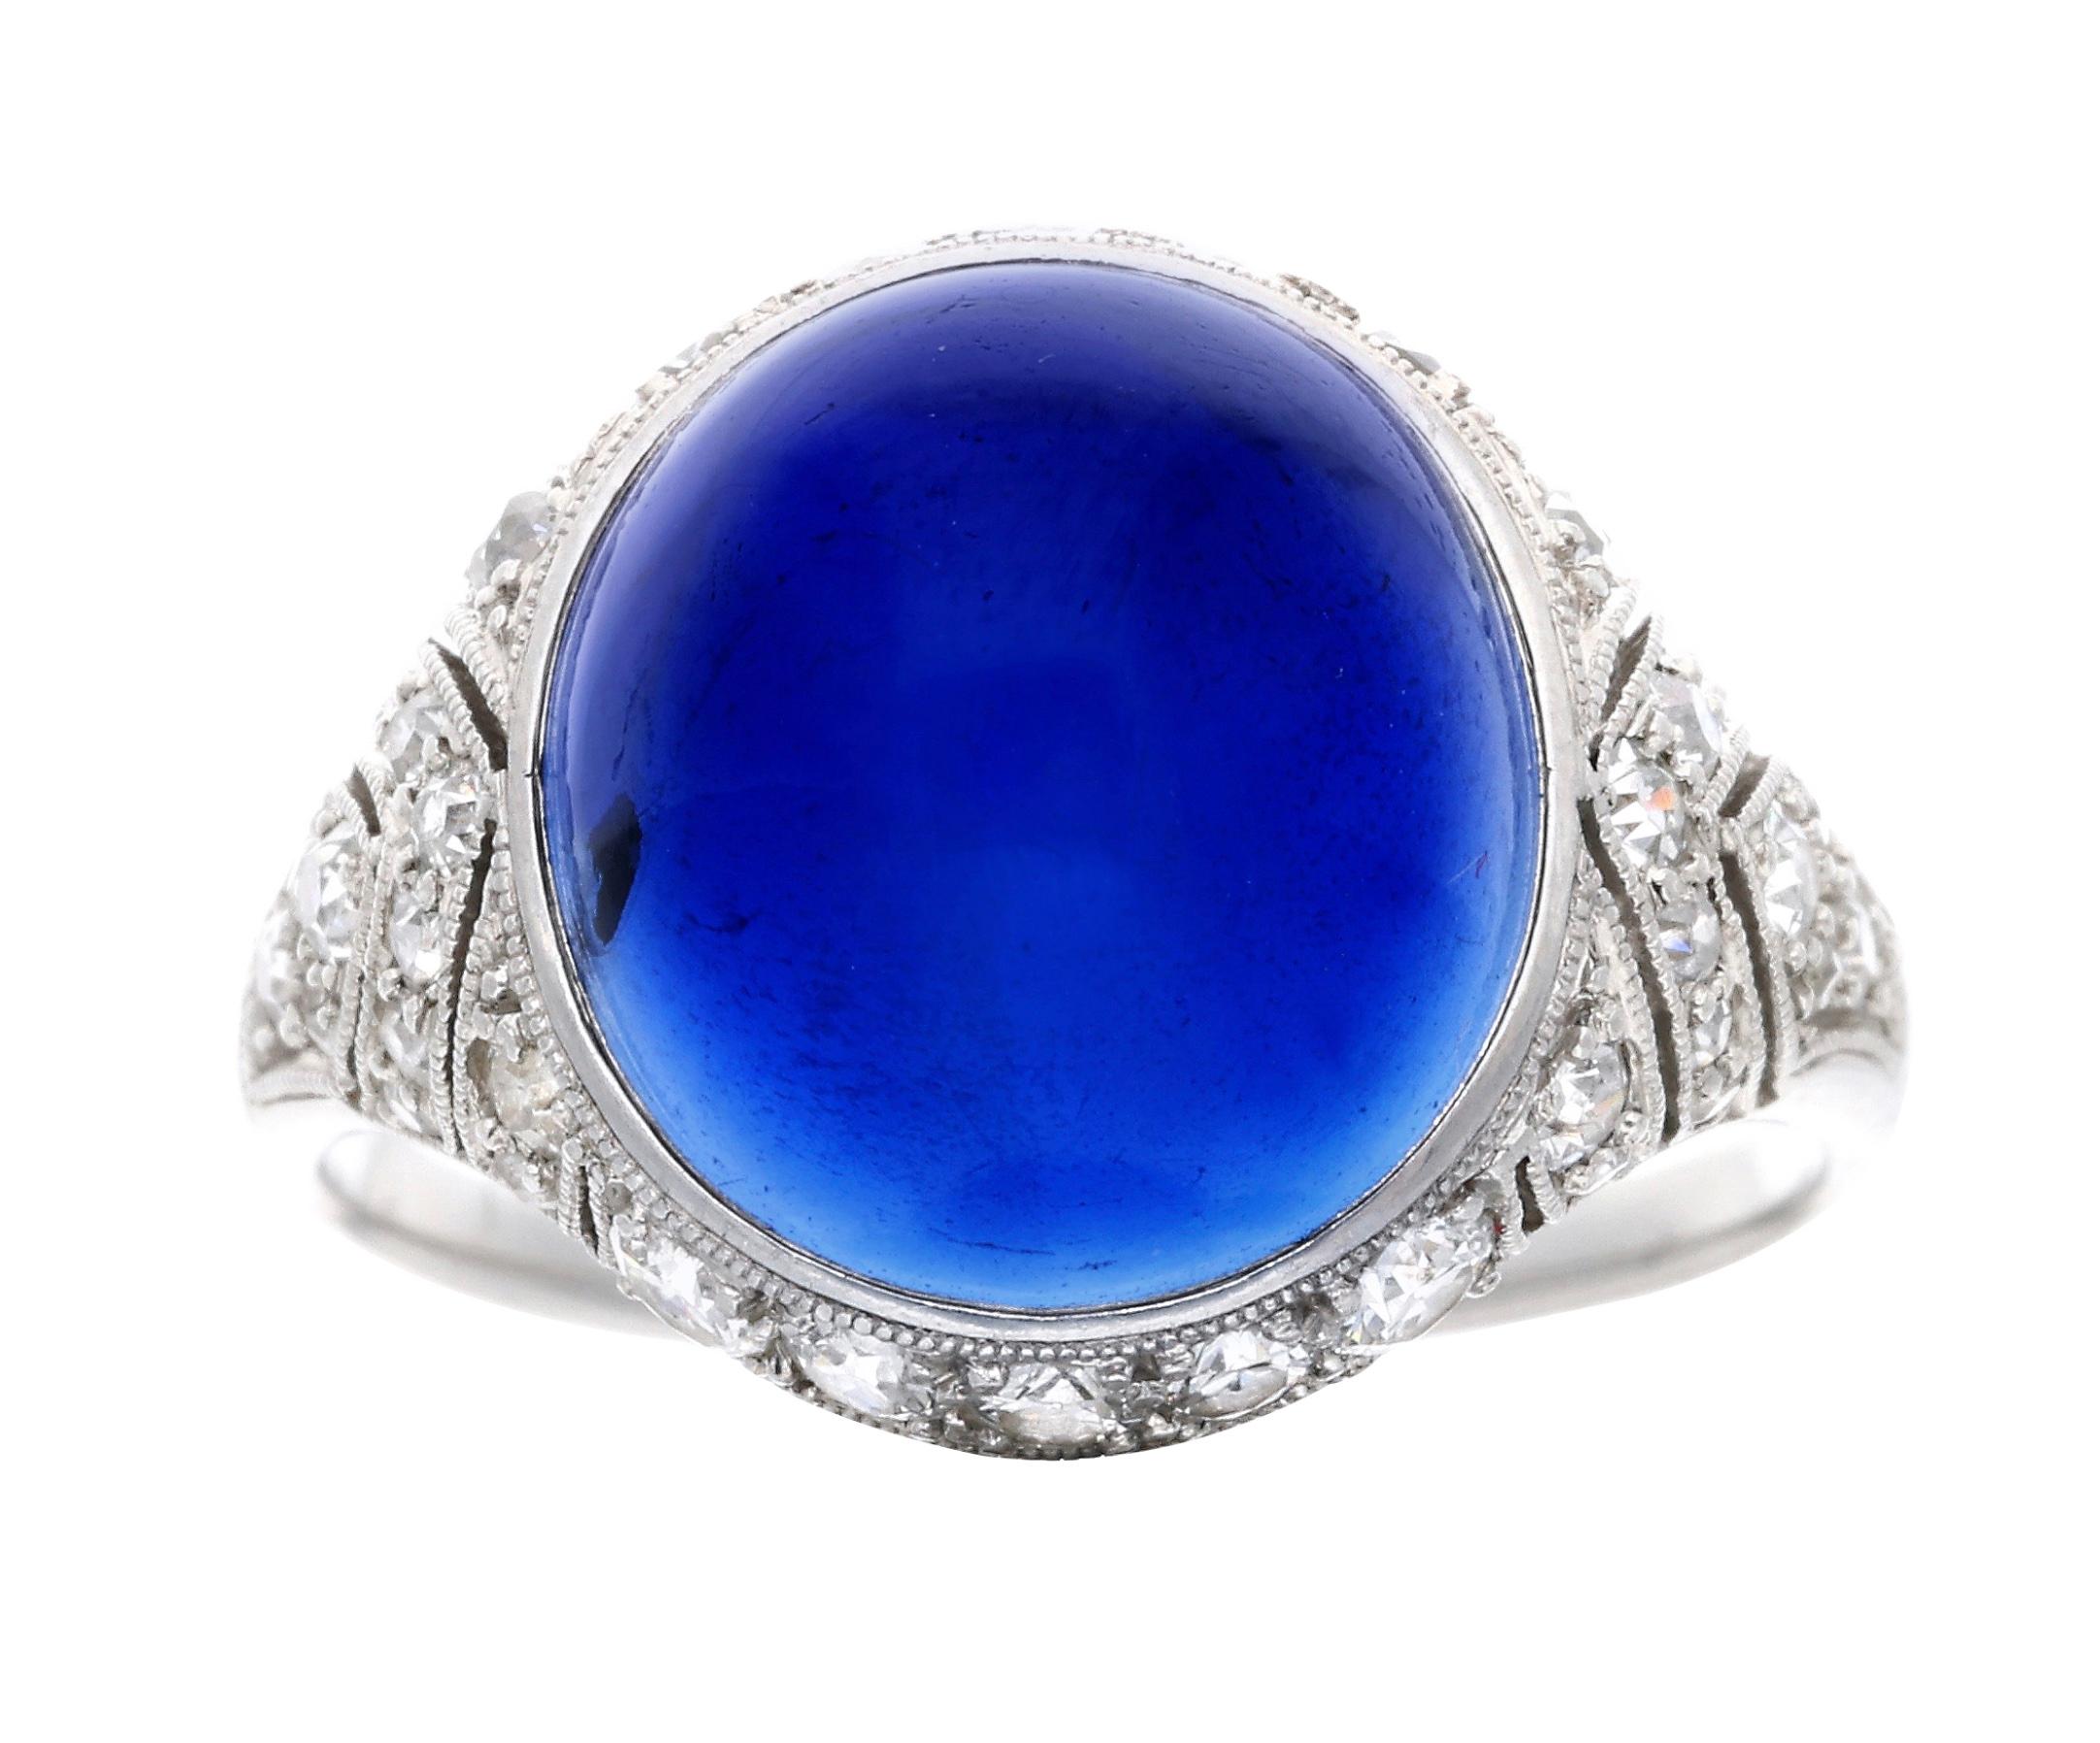 An eye-catching oval cabochon sapphire that is accented by round diamonds.

- Sapphire weighs approximately 8.55 carats
- Diamonds weigh a total of approximately 0.55 carat
- Platinum
- Total weight 6 grams
- Size 6.25

The condition report is Very